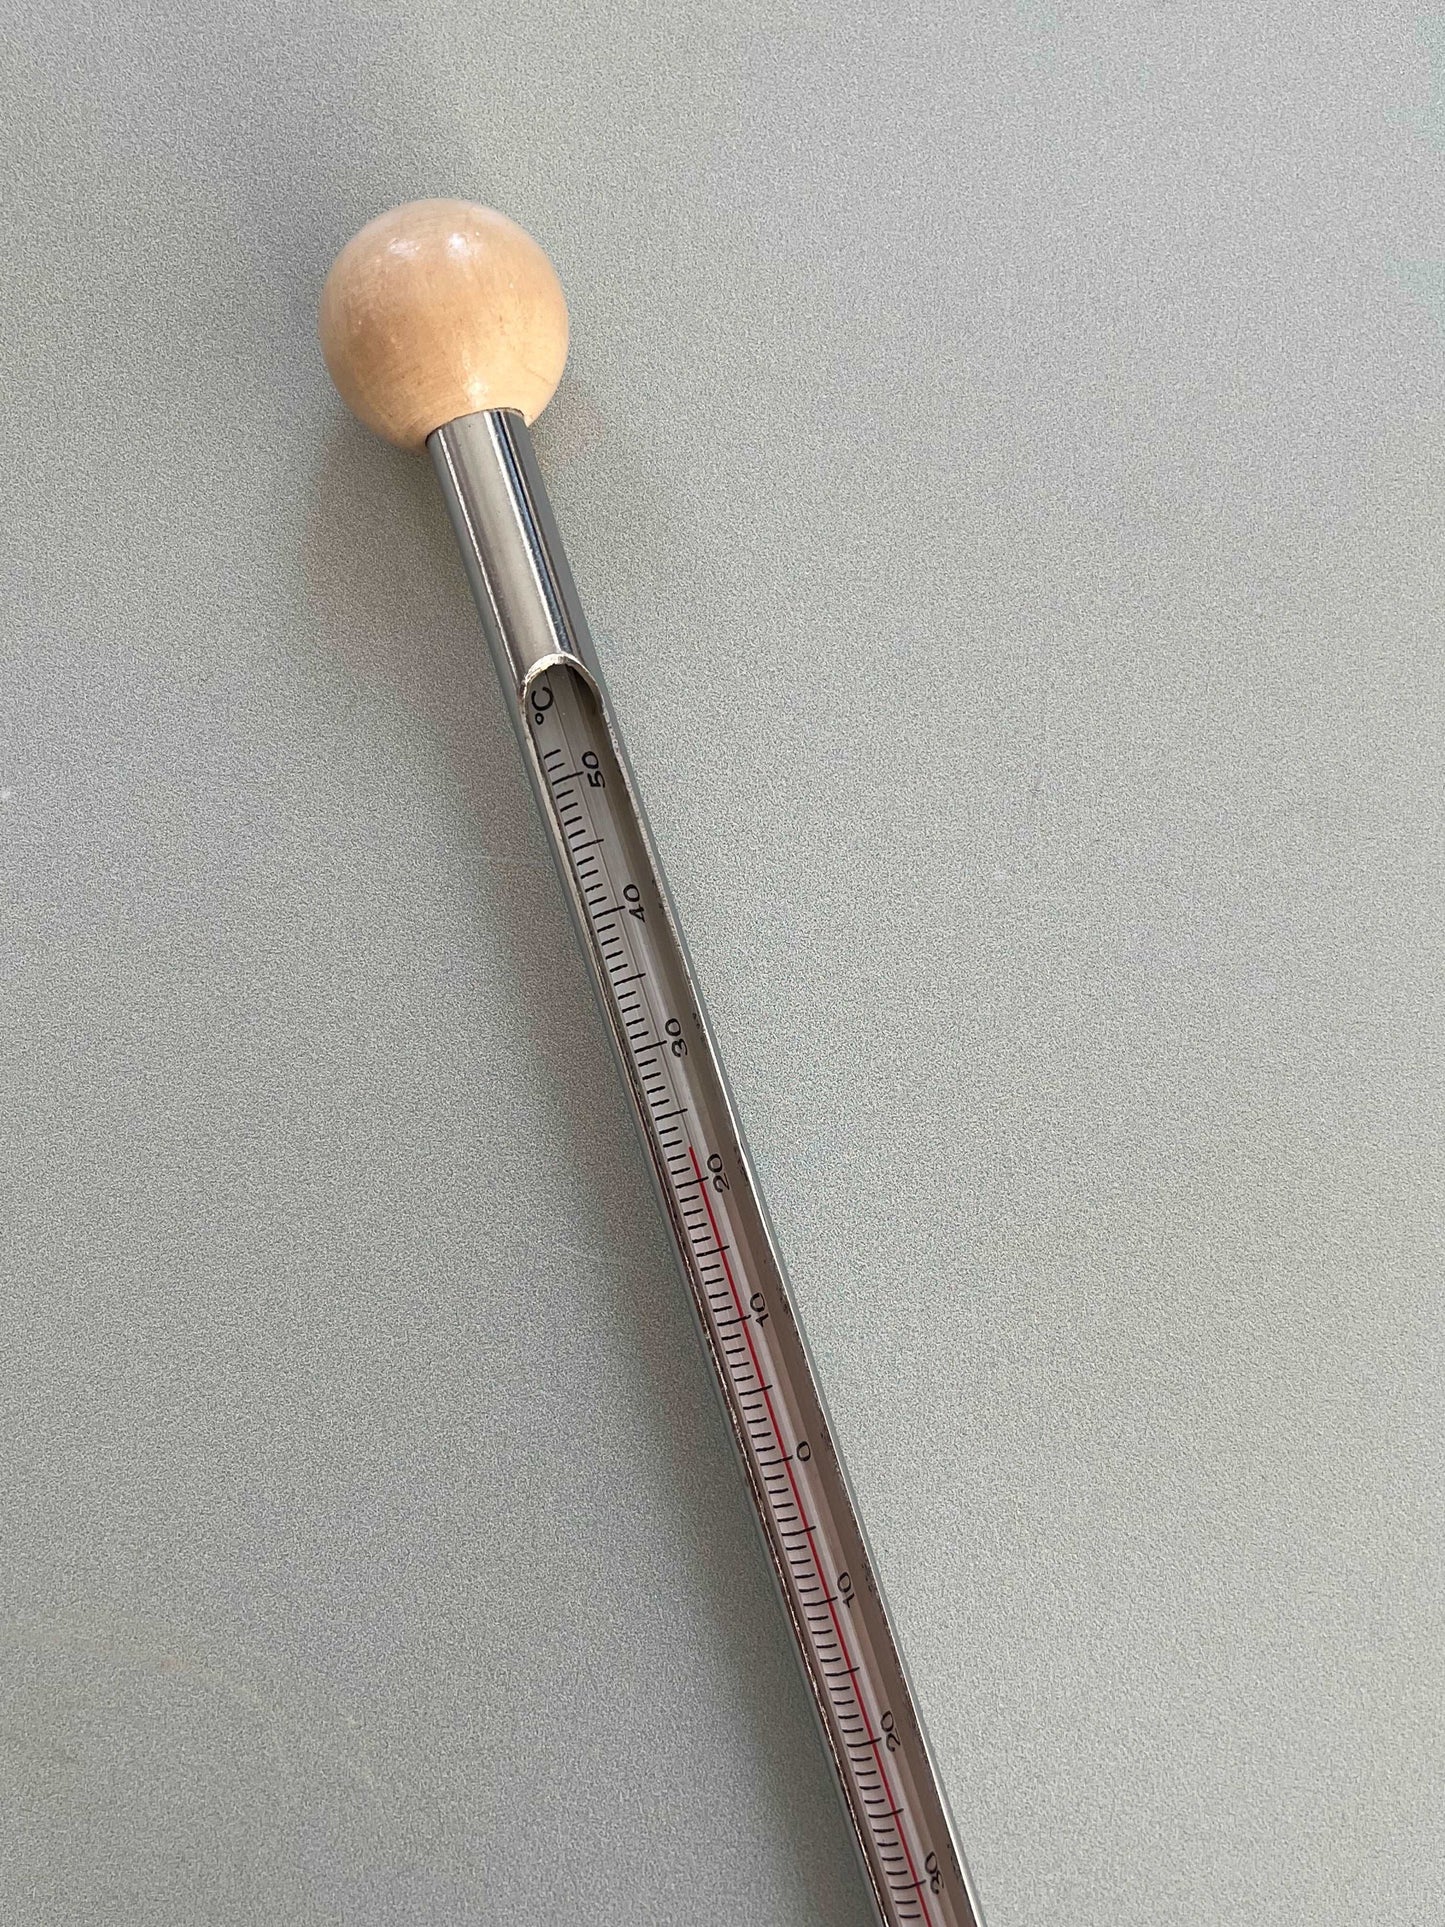 Soil Thermometer - Seedor